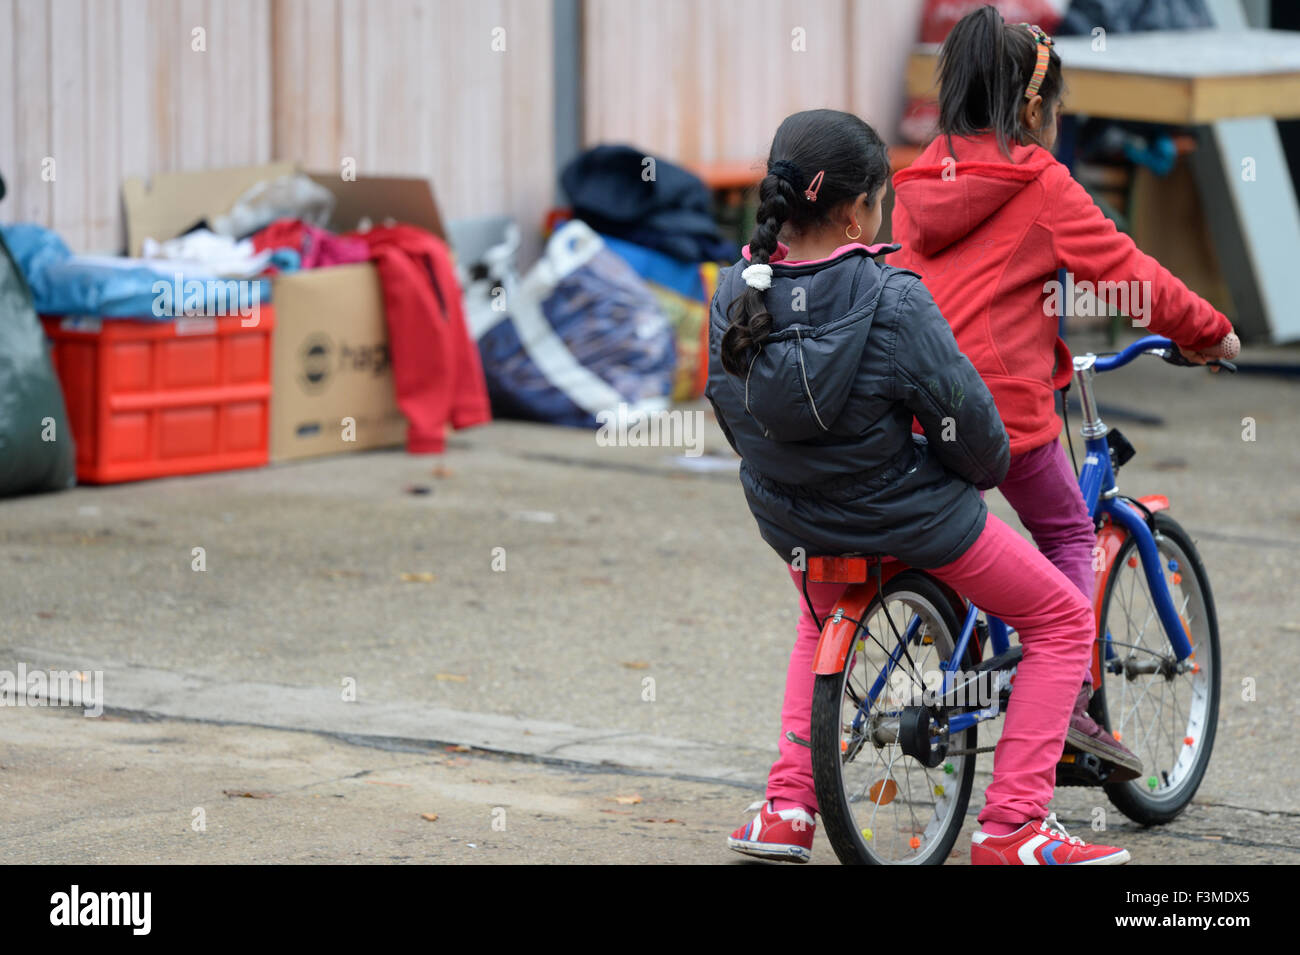 Potsdam, Germany. 9th Oct, 2015. Two refugee girls ride a bicycle on the grounds of a refugee processing centre in the public authorities headquaters in Potsdam, Germany, 9 October 2015. The German state of Brandenburg will be accepting more than 40,000 refugees after the orders of the Interior Minister. Photo: RALF HIRSCHBERGER/dpa/Alamy Live News Stock Photo